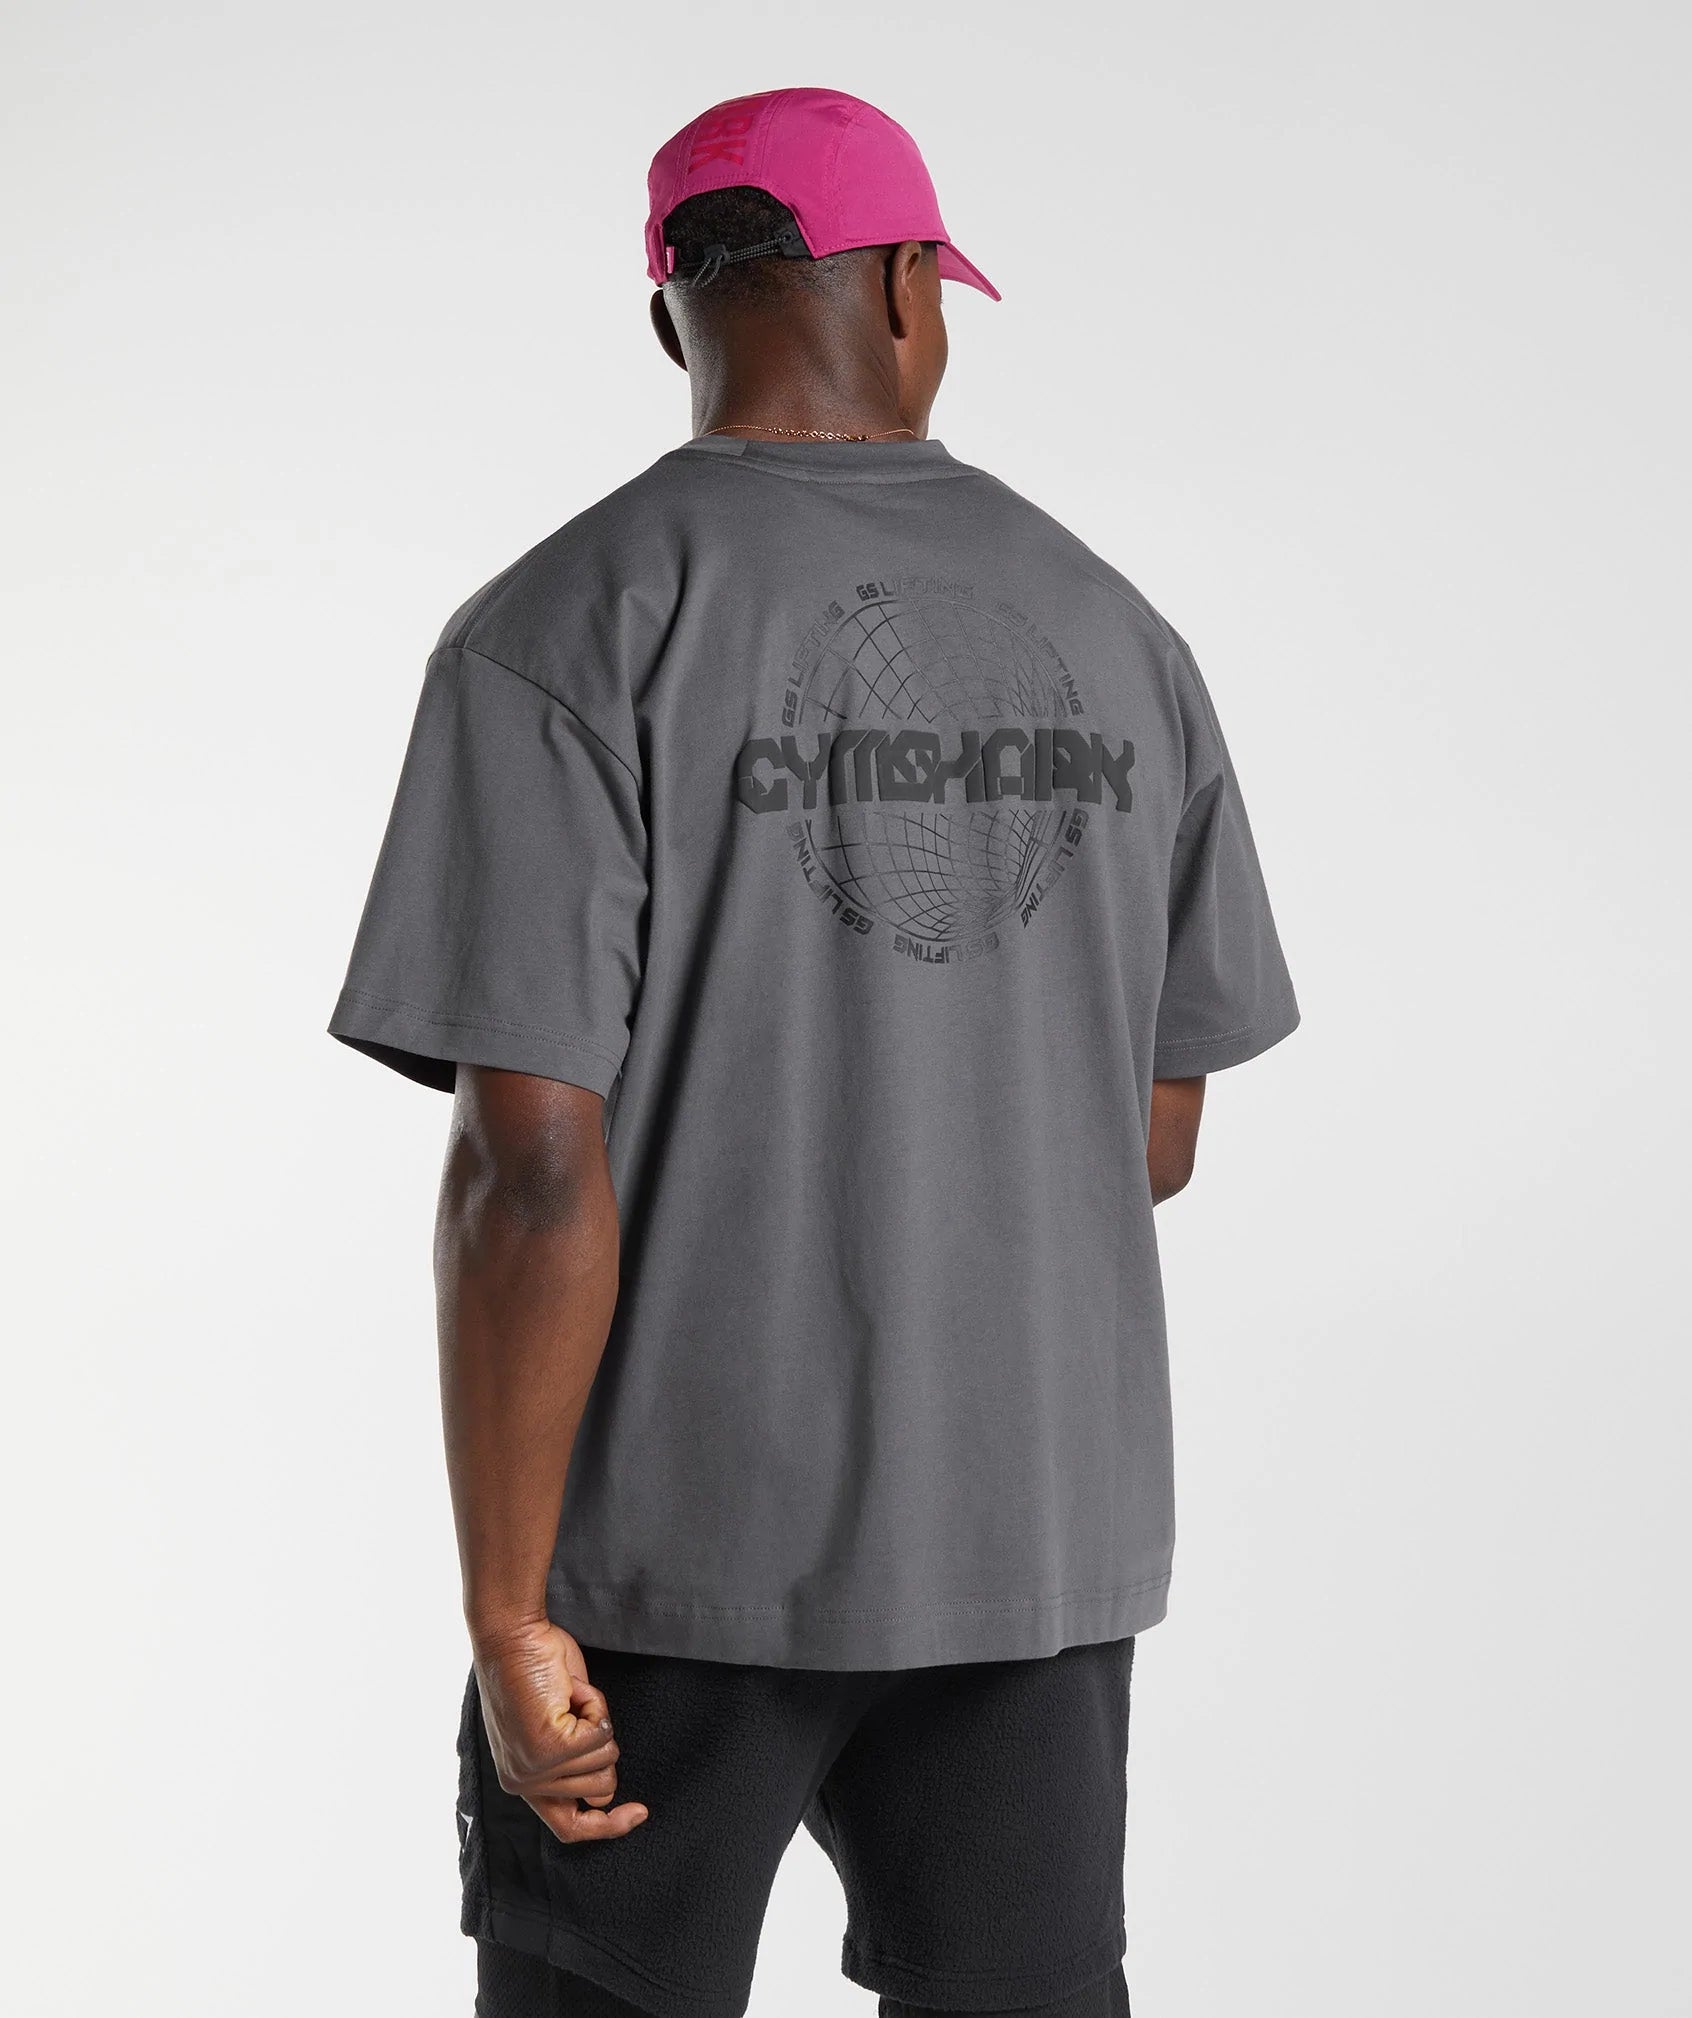 Vibes T-Shirt in Silhouette Grey